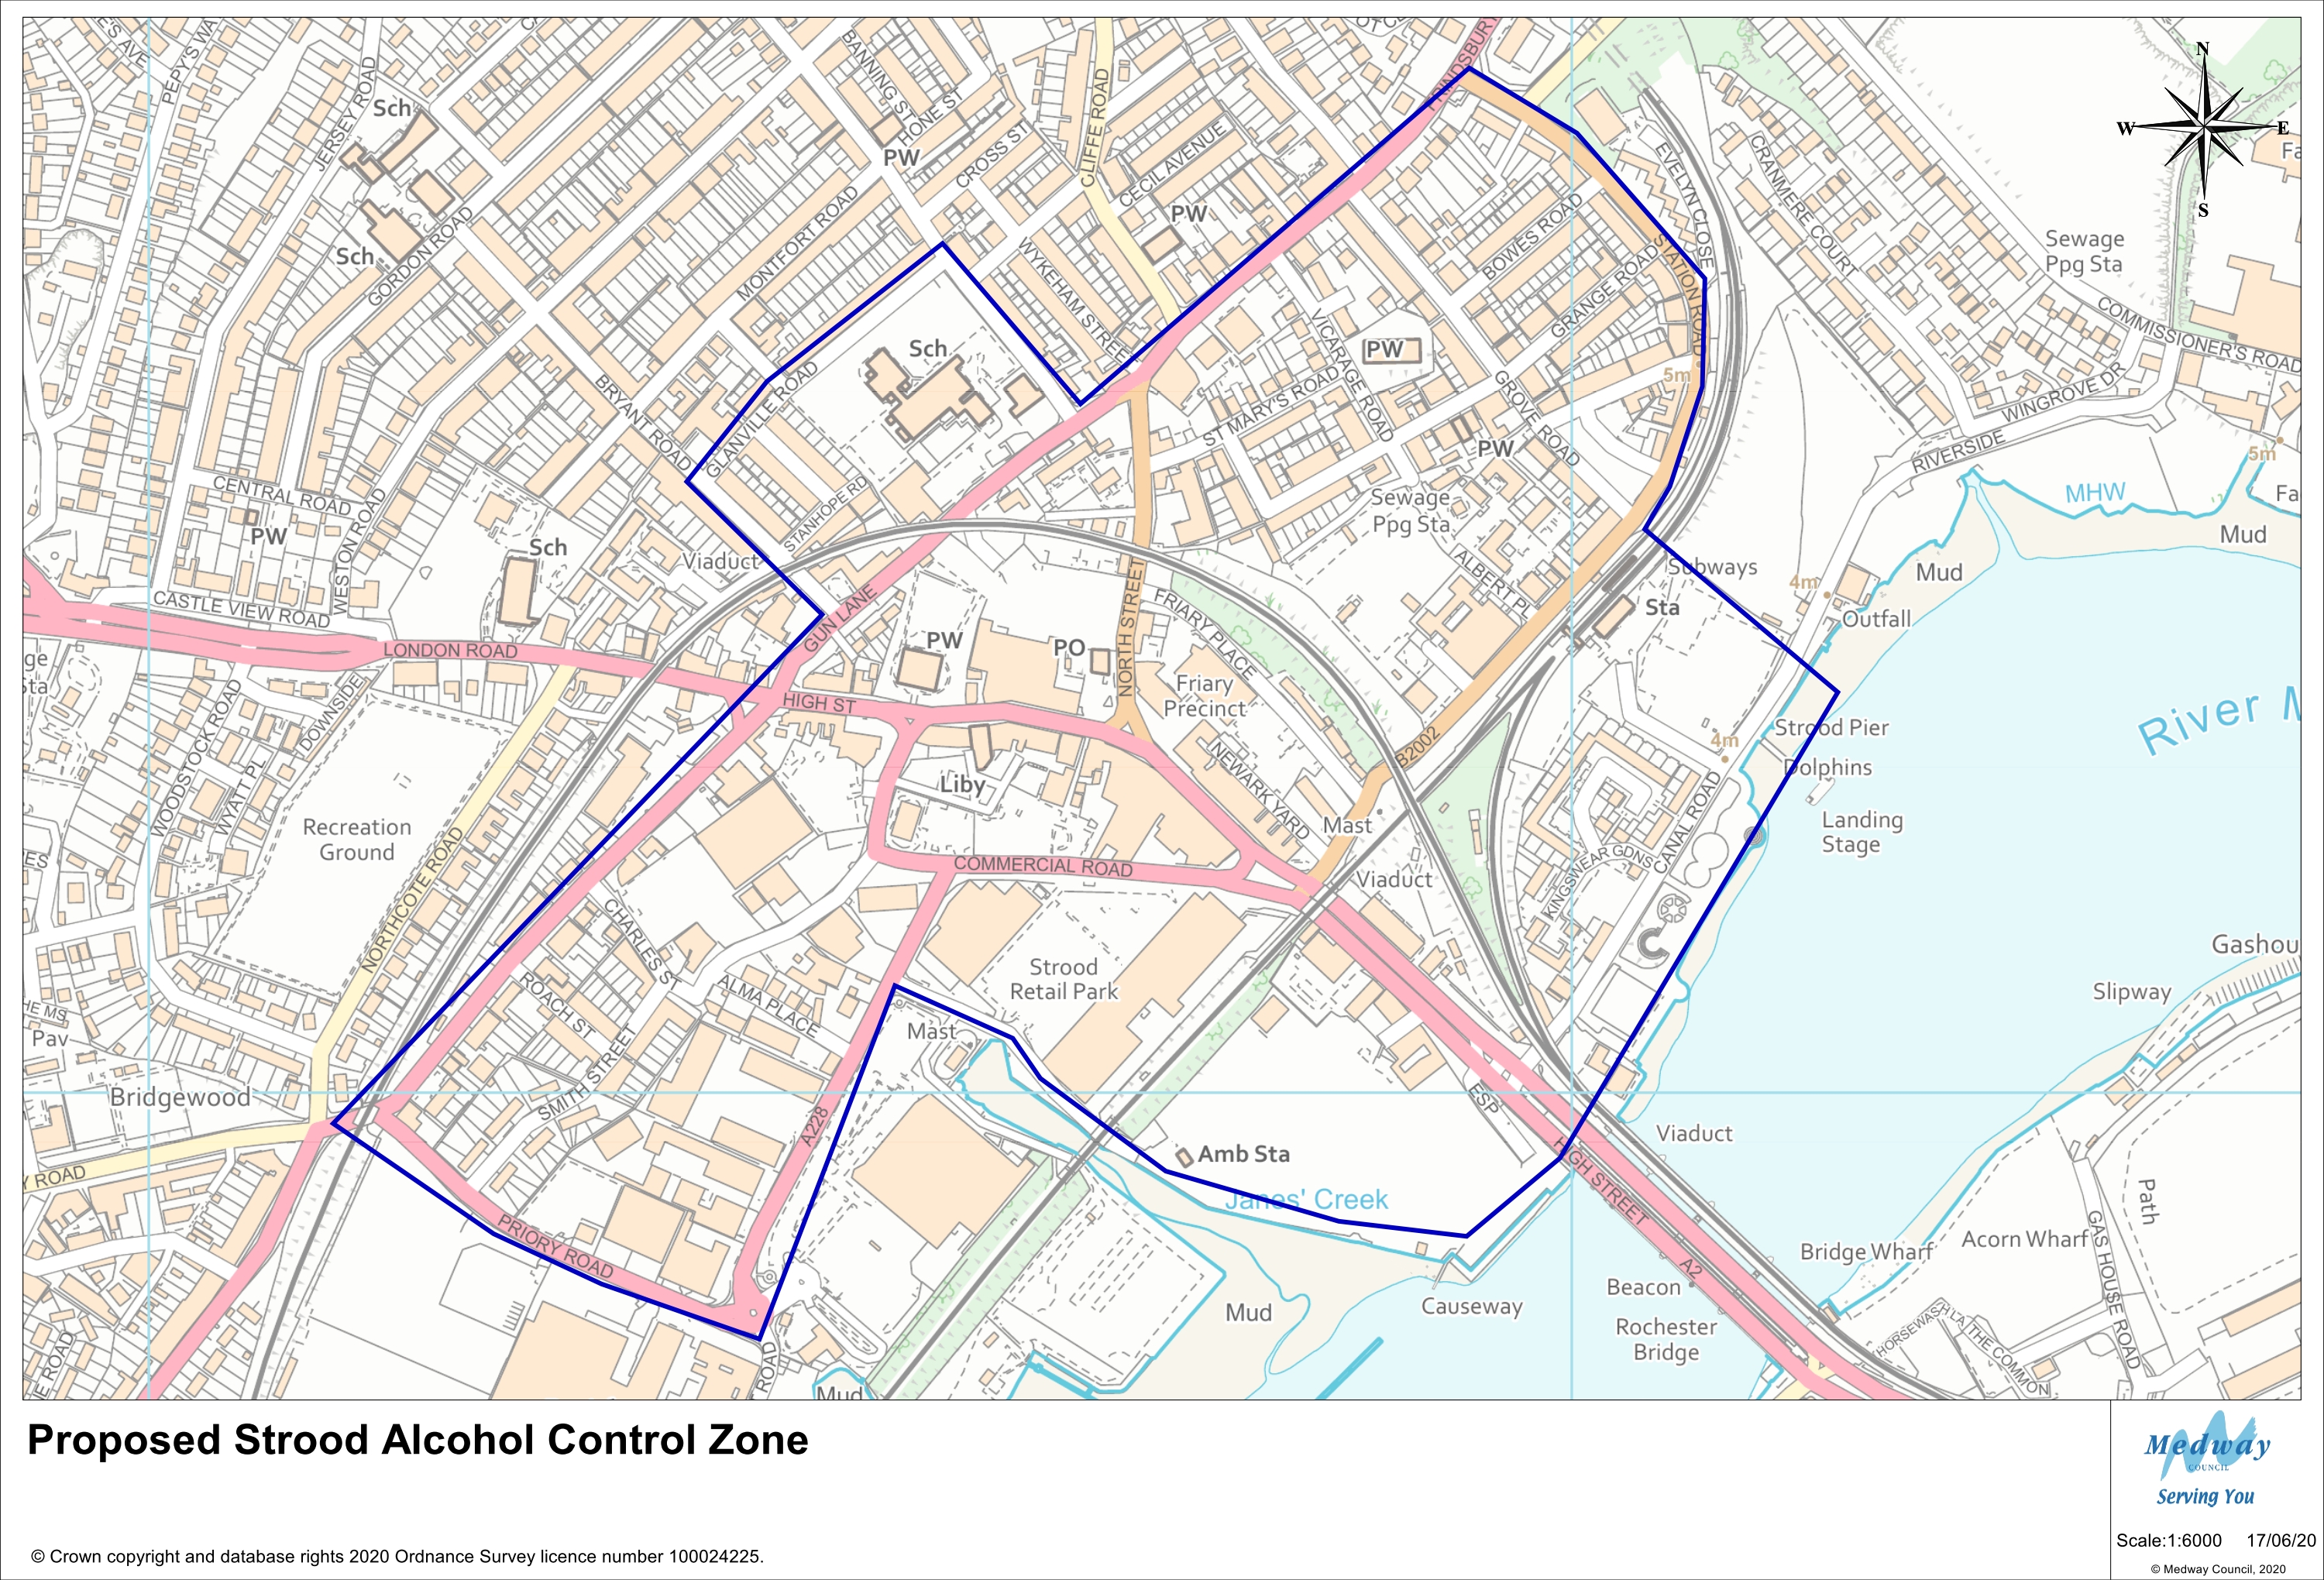 The proposed Strood Alcohol Control Zone covers Strood Town Centre. Starting on Canal Road near The Riverside Tavern the zone follows the river along to Jane’s Creek, next to the Former Civic Centre. The proposed zone includes Strood Retail Park and Knight Road and then proceeds west along Priory Road. The zone follows along Cuxton Road and Gun Lane and includes the area of Bryant Road, Glanville Road and Brompton Lane. The zone progresses along Gun Lane and Frindsbury Road, before turning along Station Road and joining back at Canal Road near Strood Train Station.